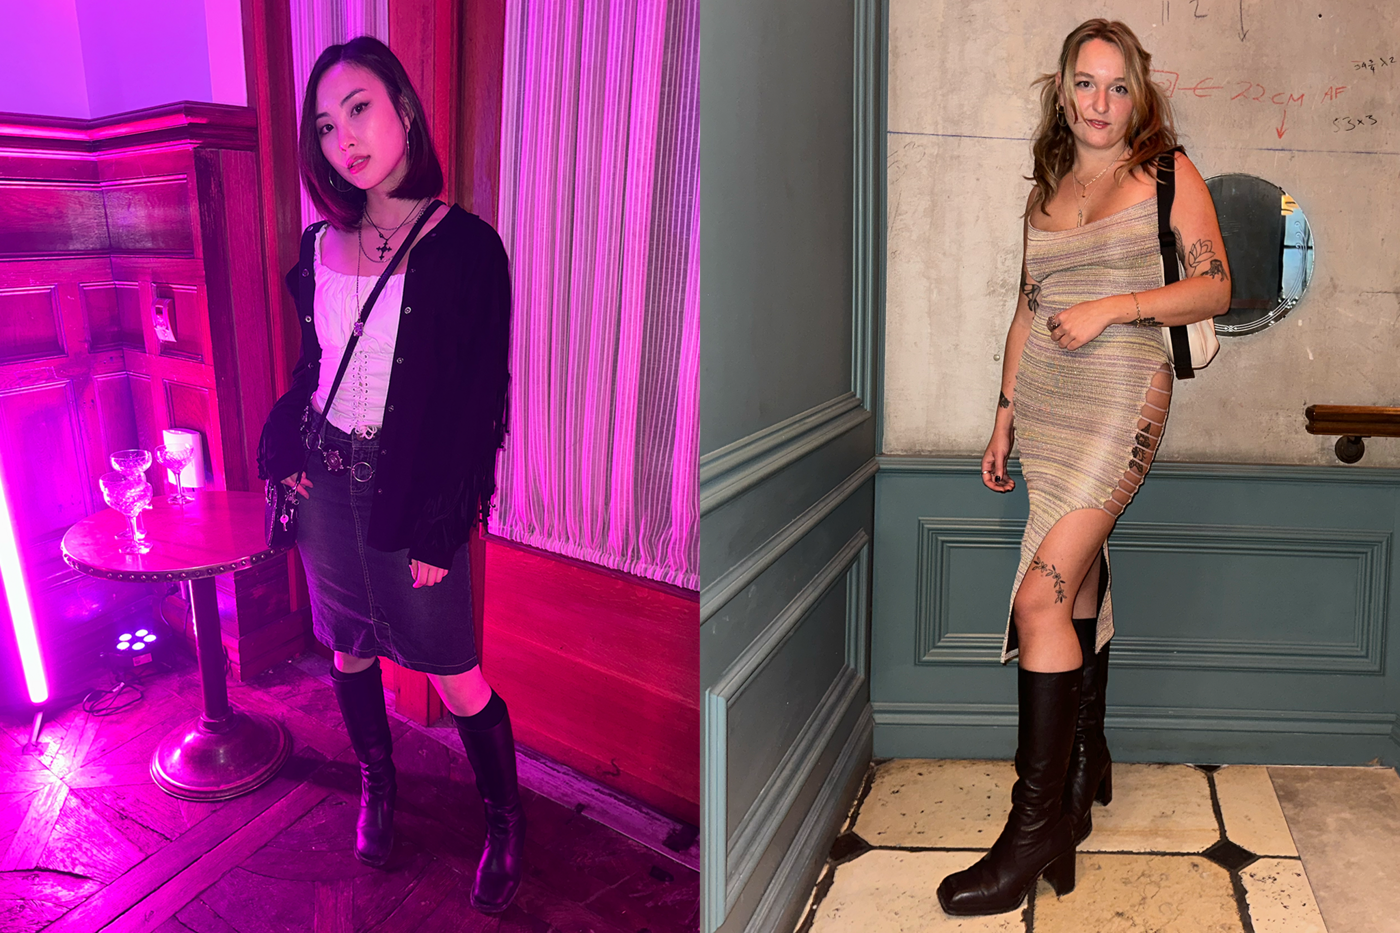 The best looks from a Euphoria-themed party at SoHo House in Toronto